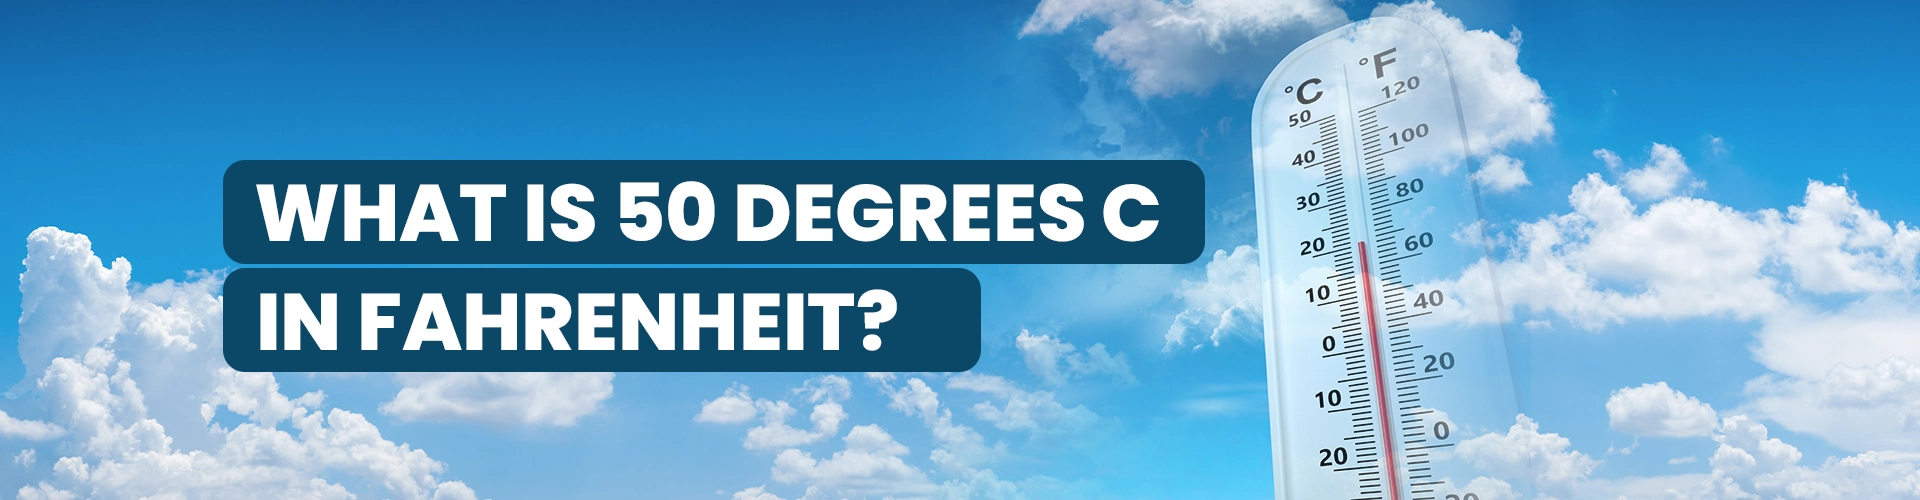 what is 50 degrees celsius in fahrenheit